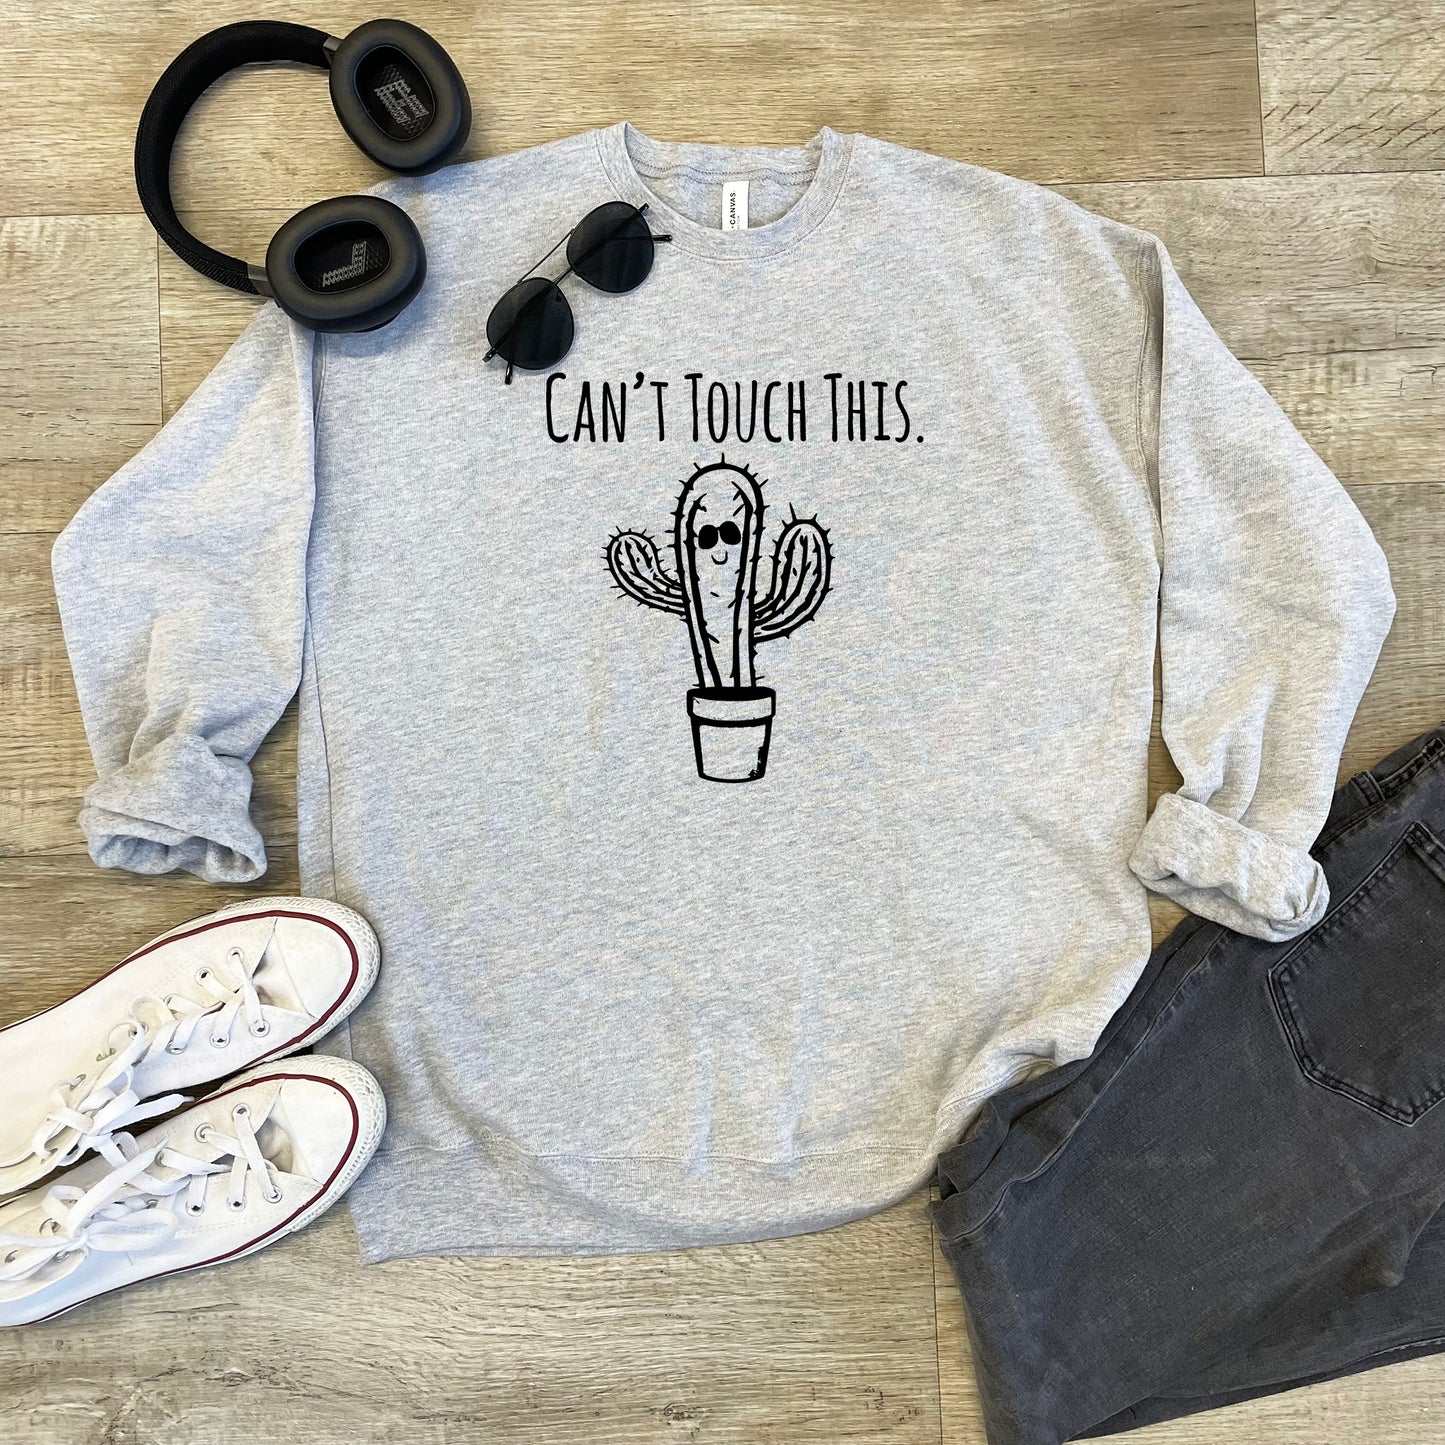 Can't Touch This (Cactus) - Unisex Sweatshirt - Heather Gray or Dusty Blue